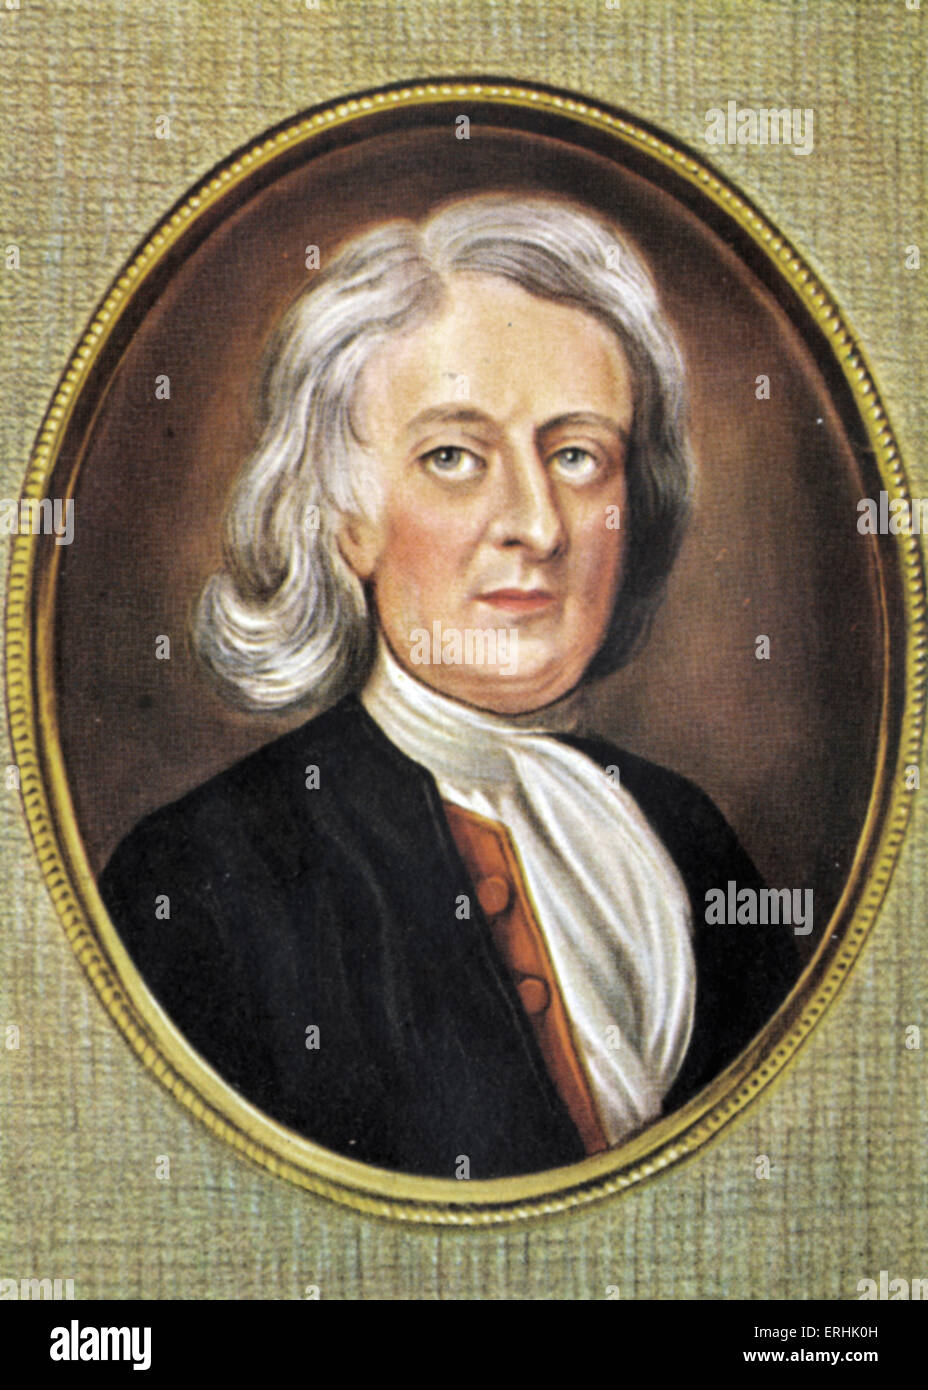 Isaac Newton. Portrait of the English mathematician, physicist, astronomer and philosopher. 4 January 1643 – 31 March 1727 Stock Photo